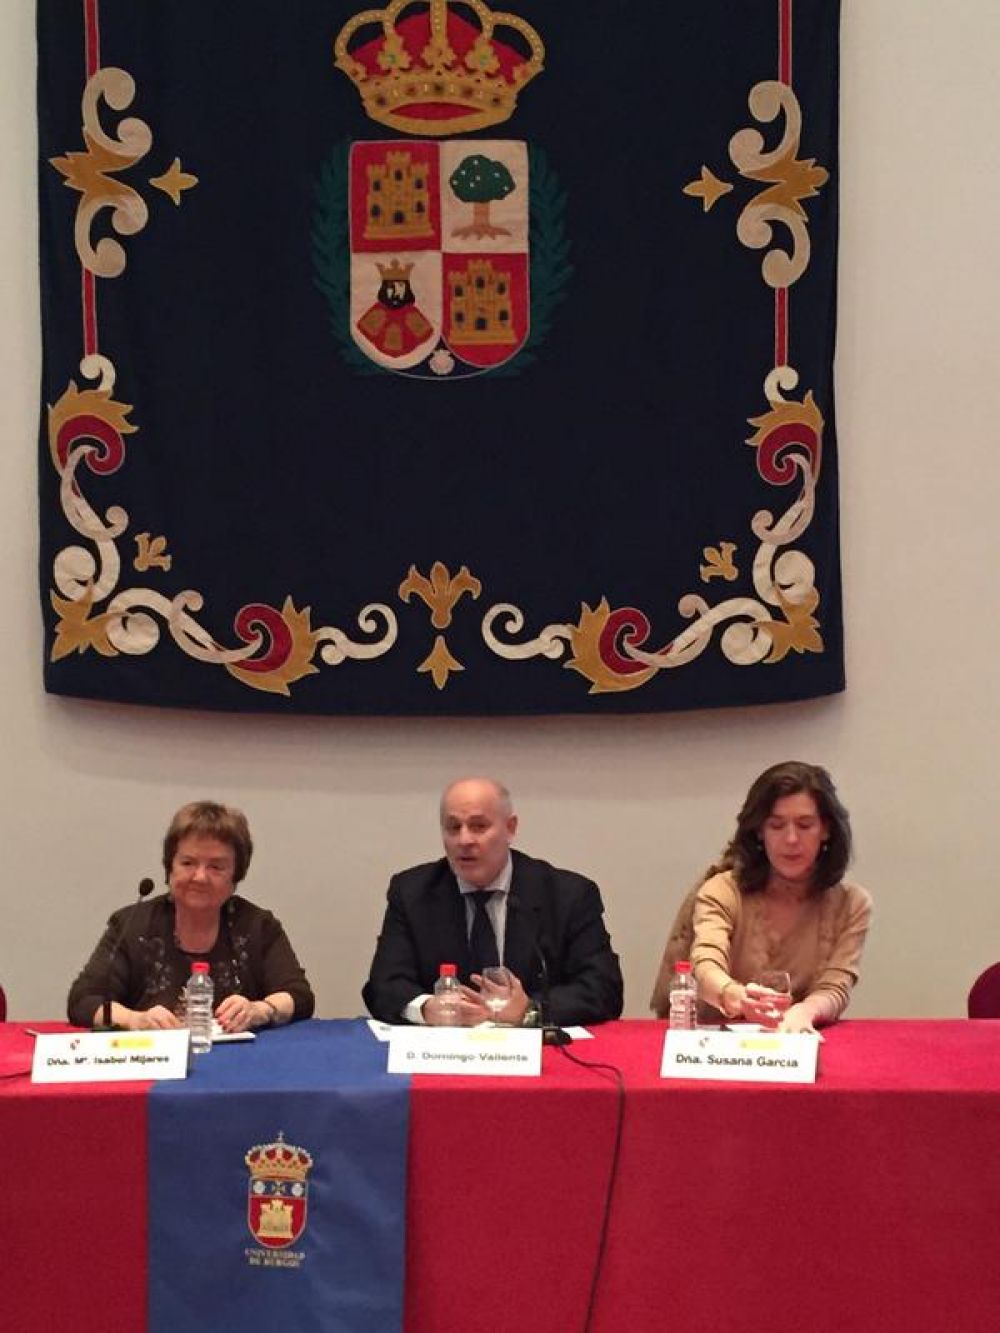 Wine in Moderation presented at Spanish Wine & Health conference